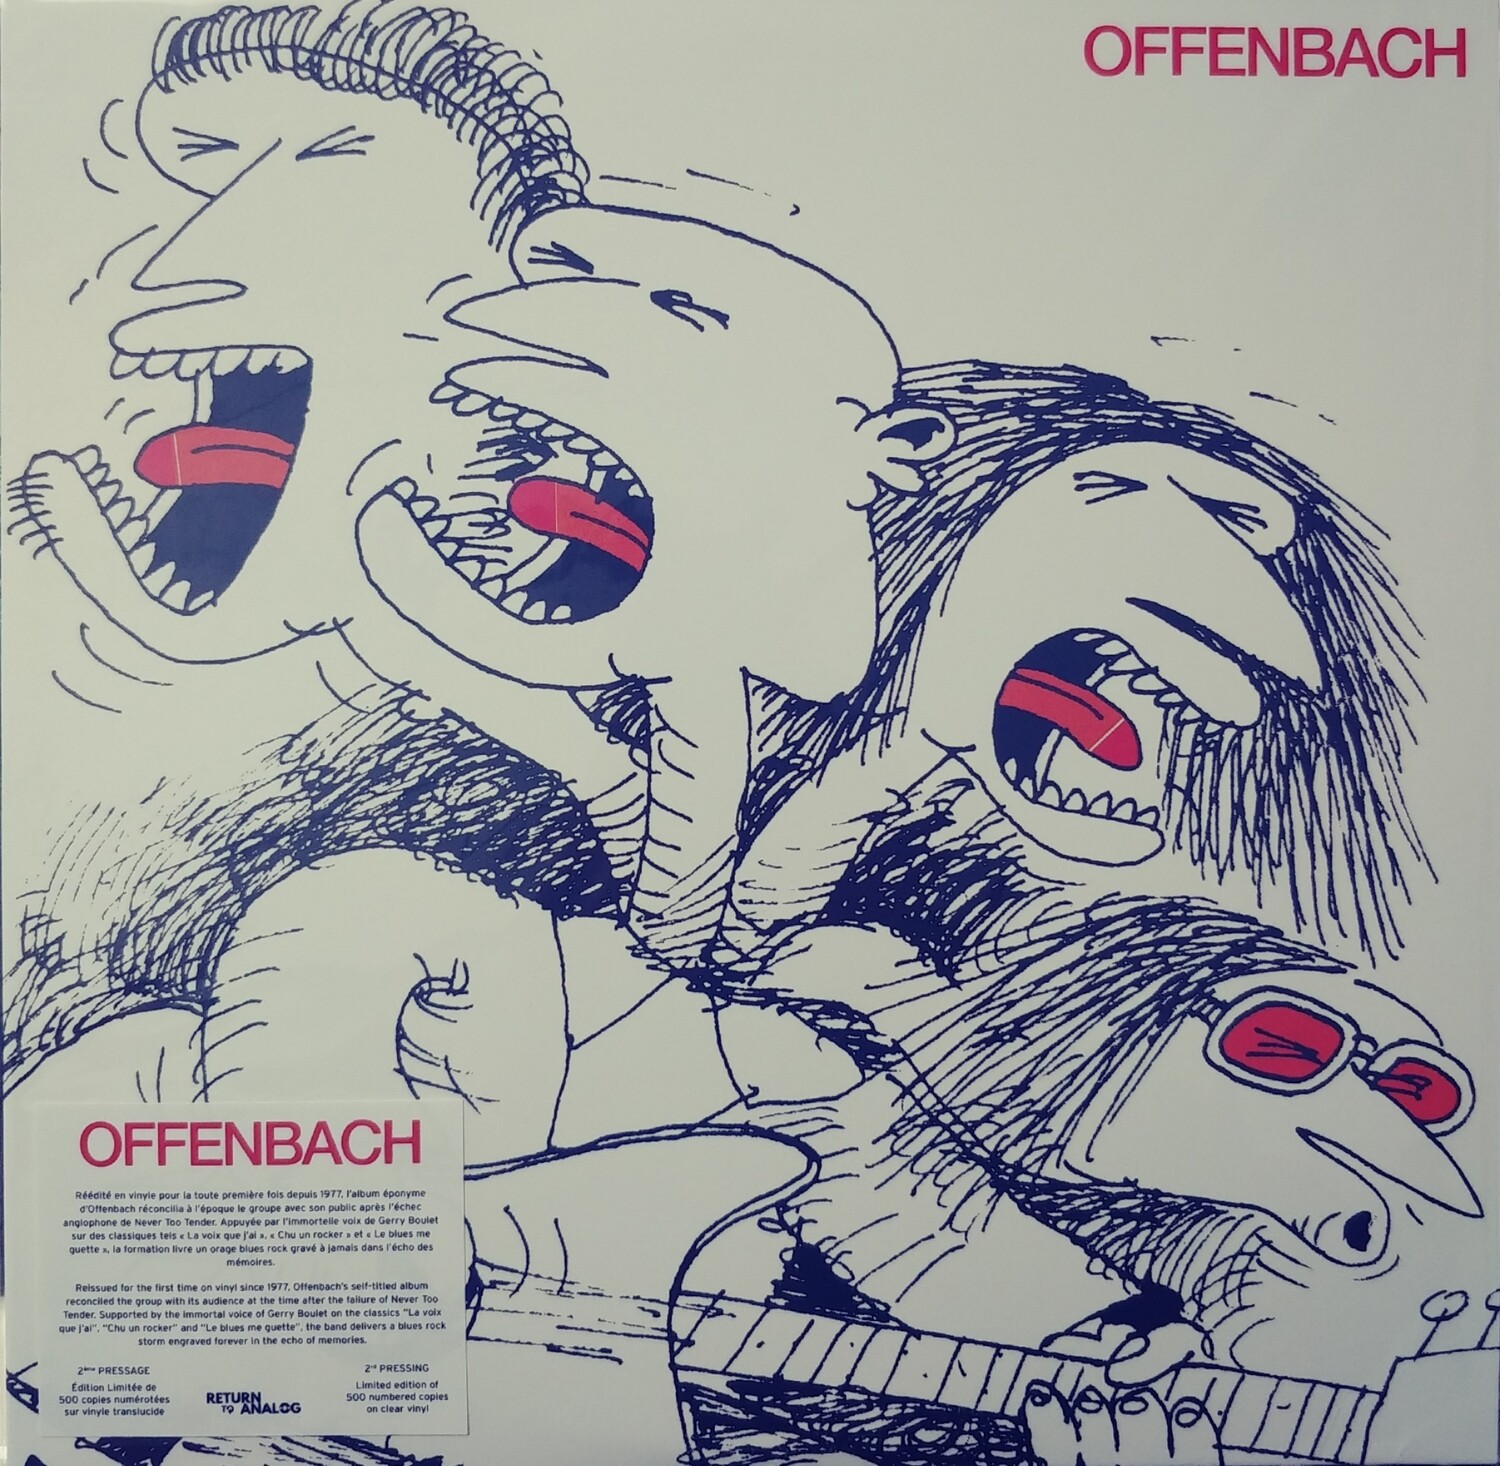 Offenbach - Offenbach (Caricatures)